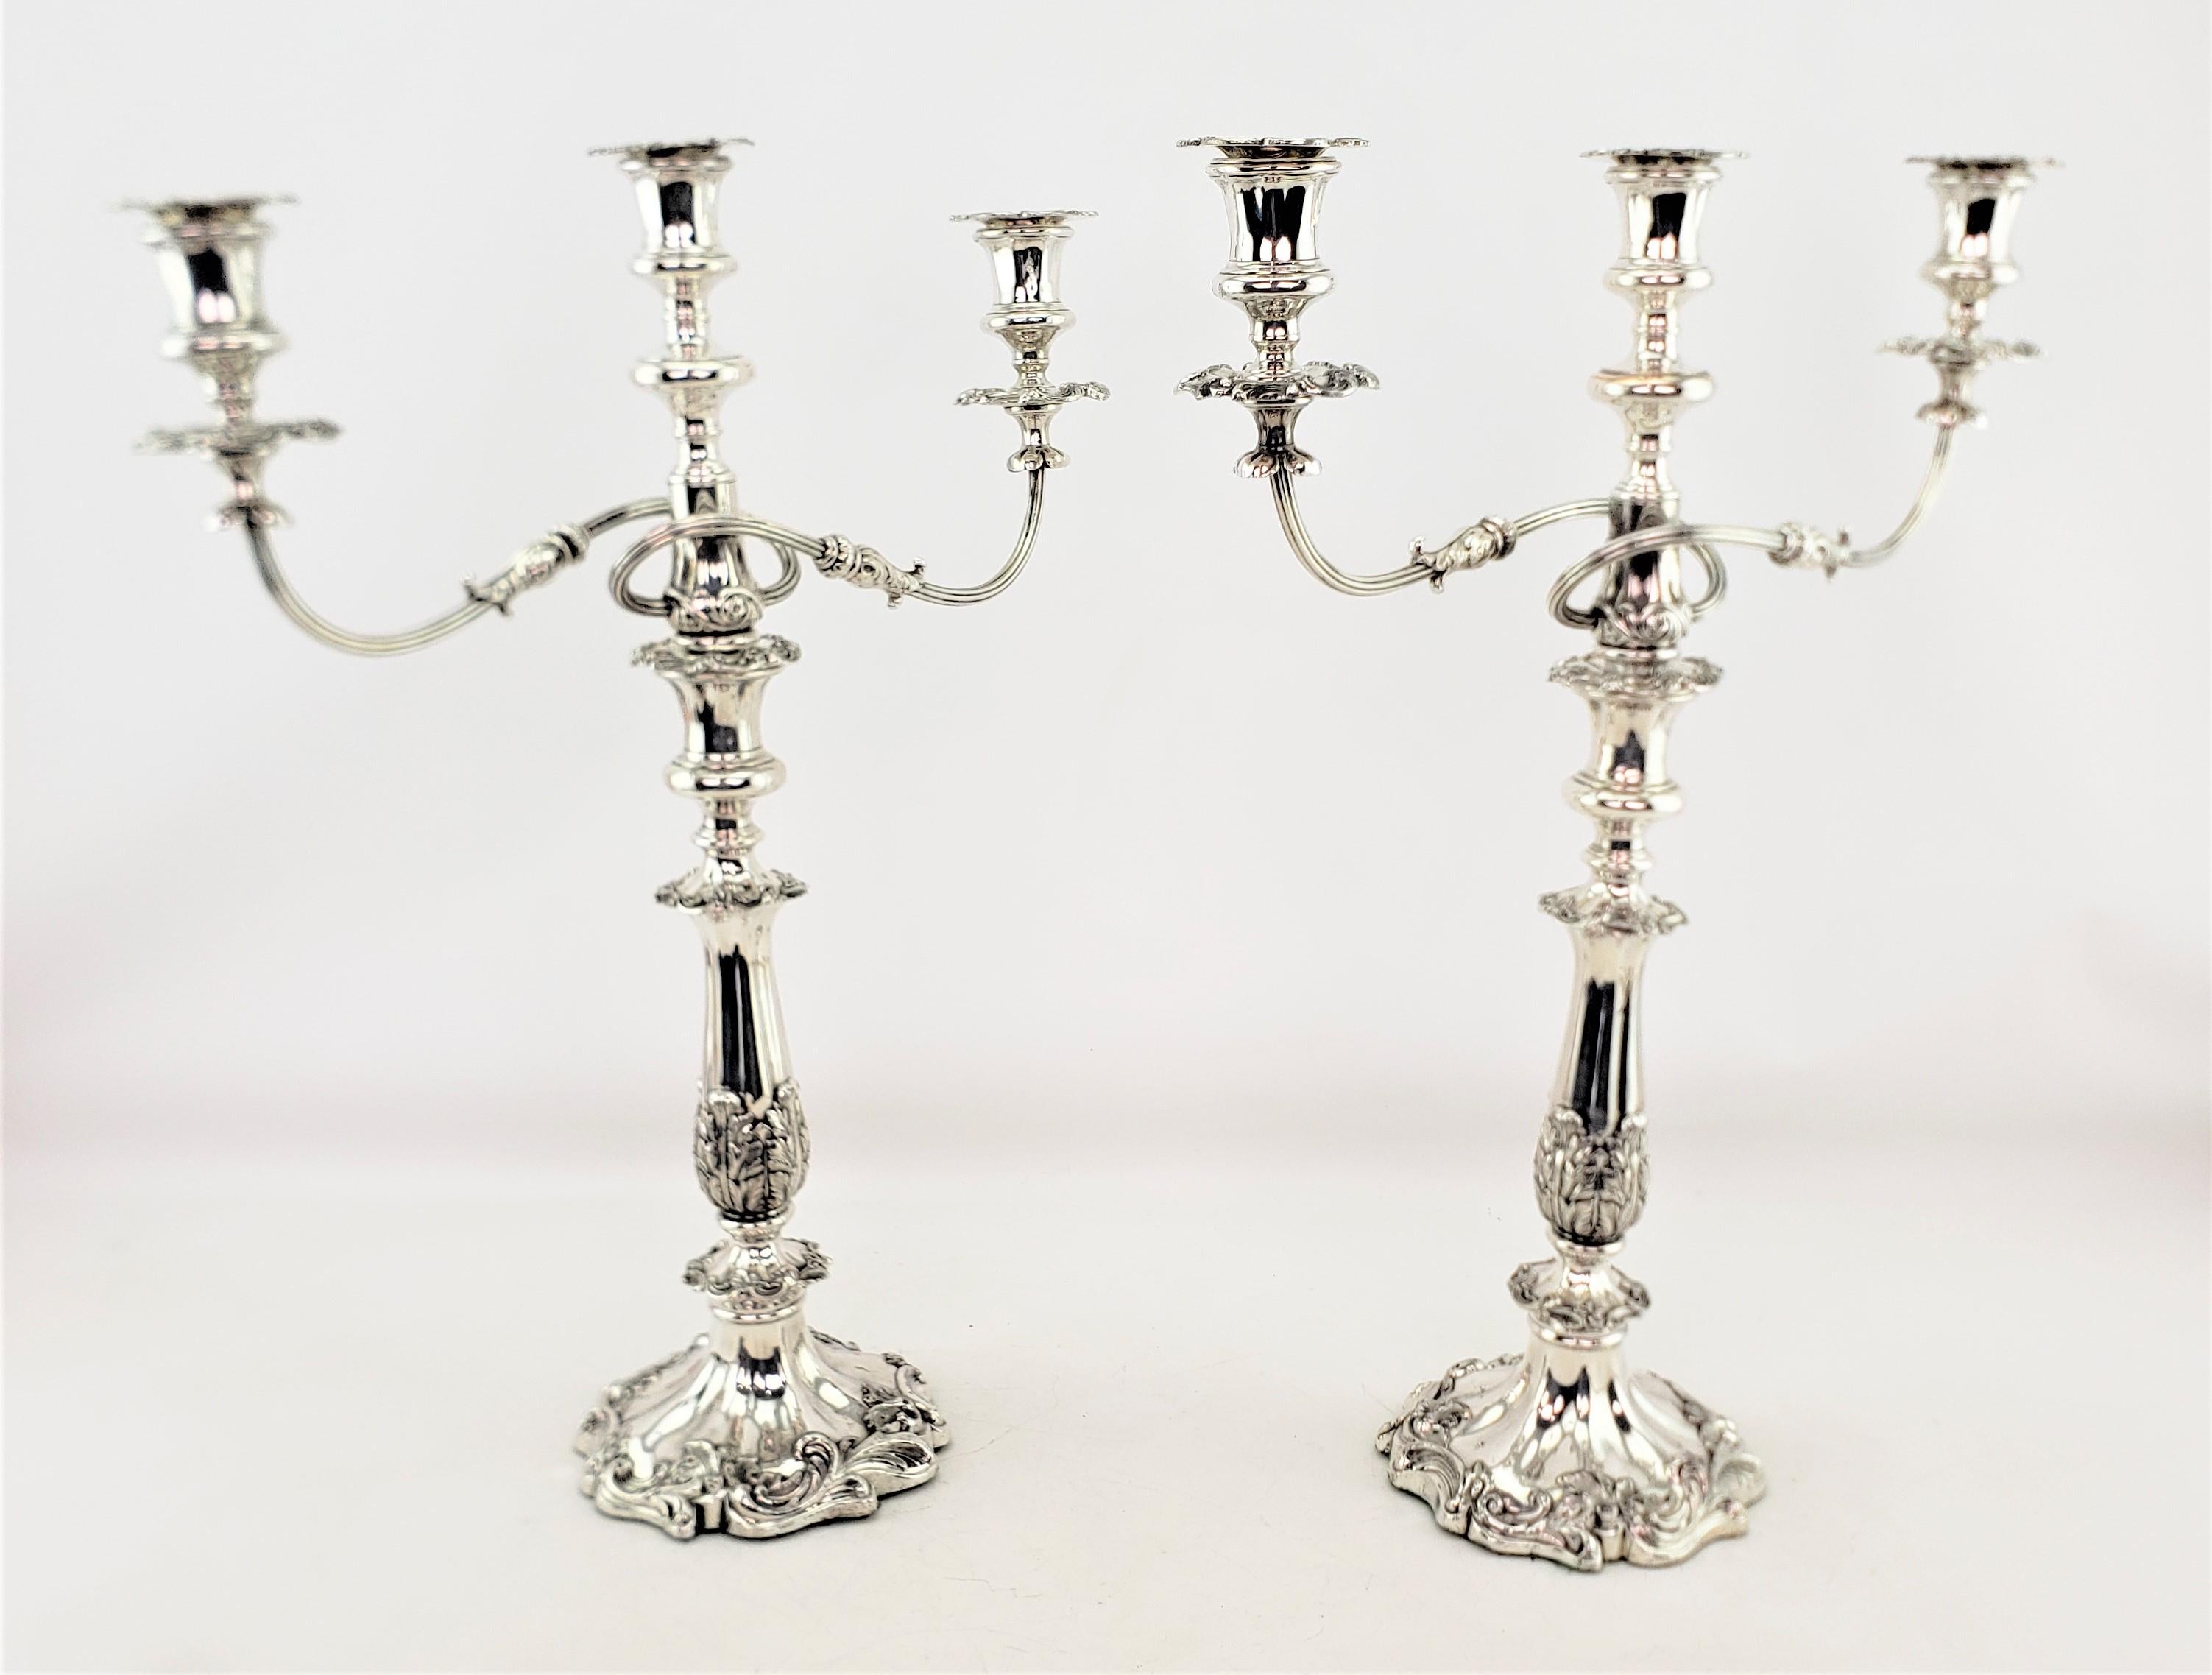 Victorian Antique Silver Plated Convertible Candelabras or Candlesticks with Leaf Decor For Sale